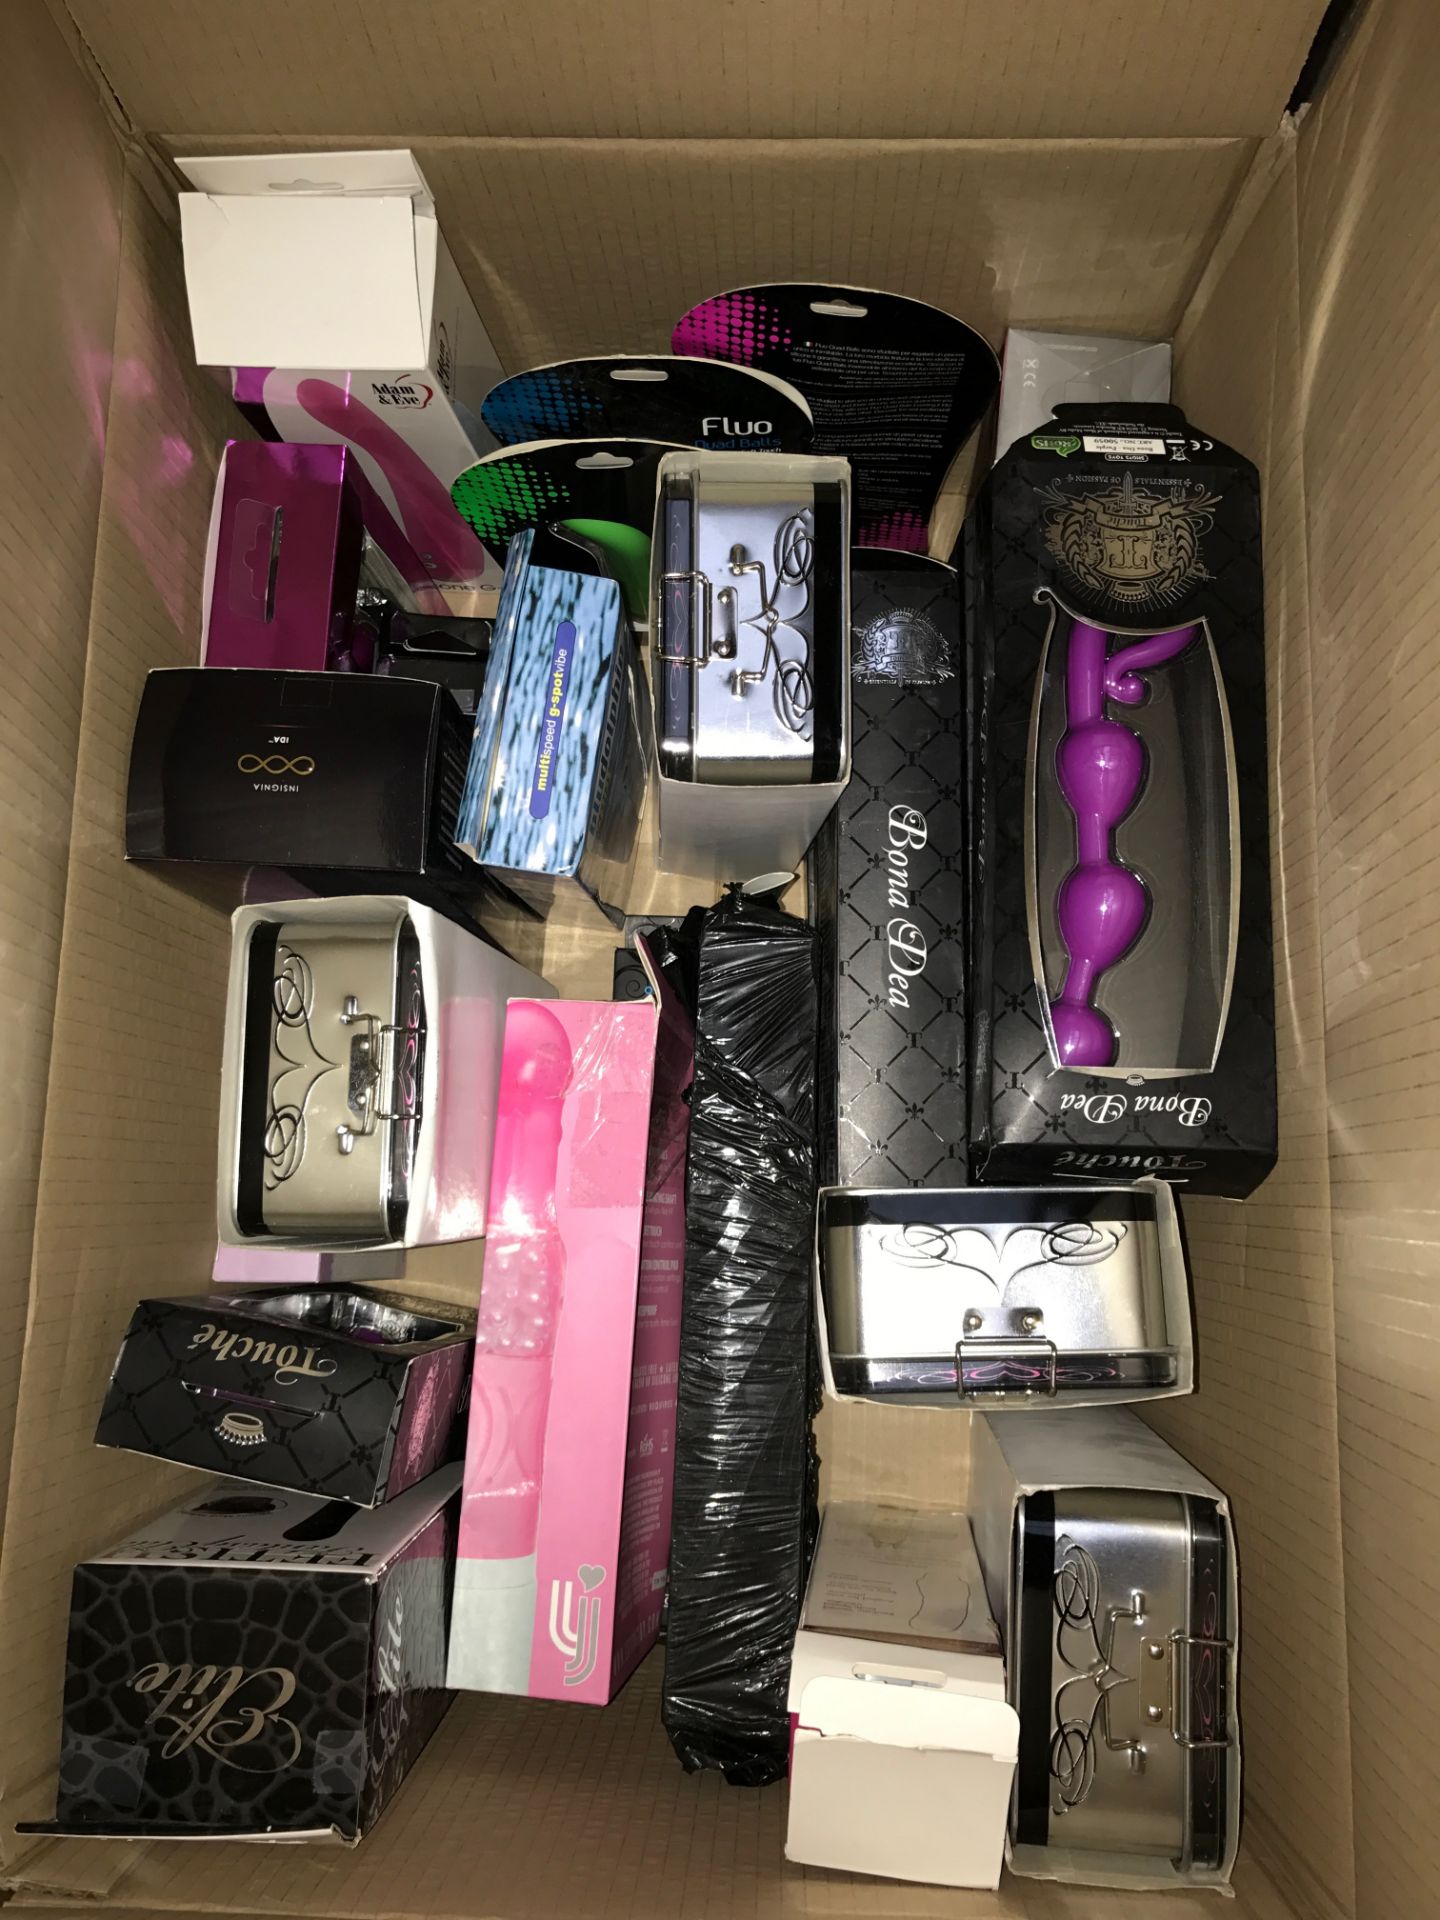 Pallet of Adult Toys - Direct from Amazon Warehouse Deals - Large Pallet - Image 3 of 29